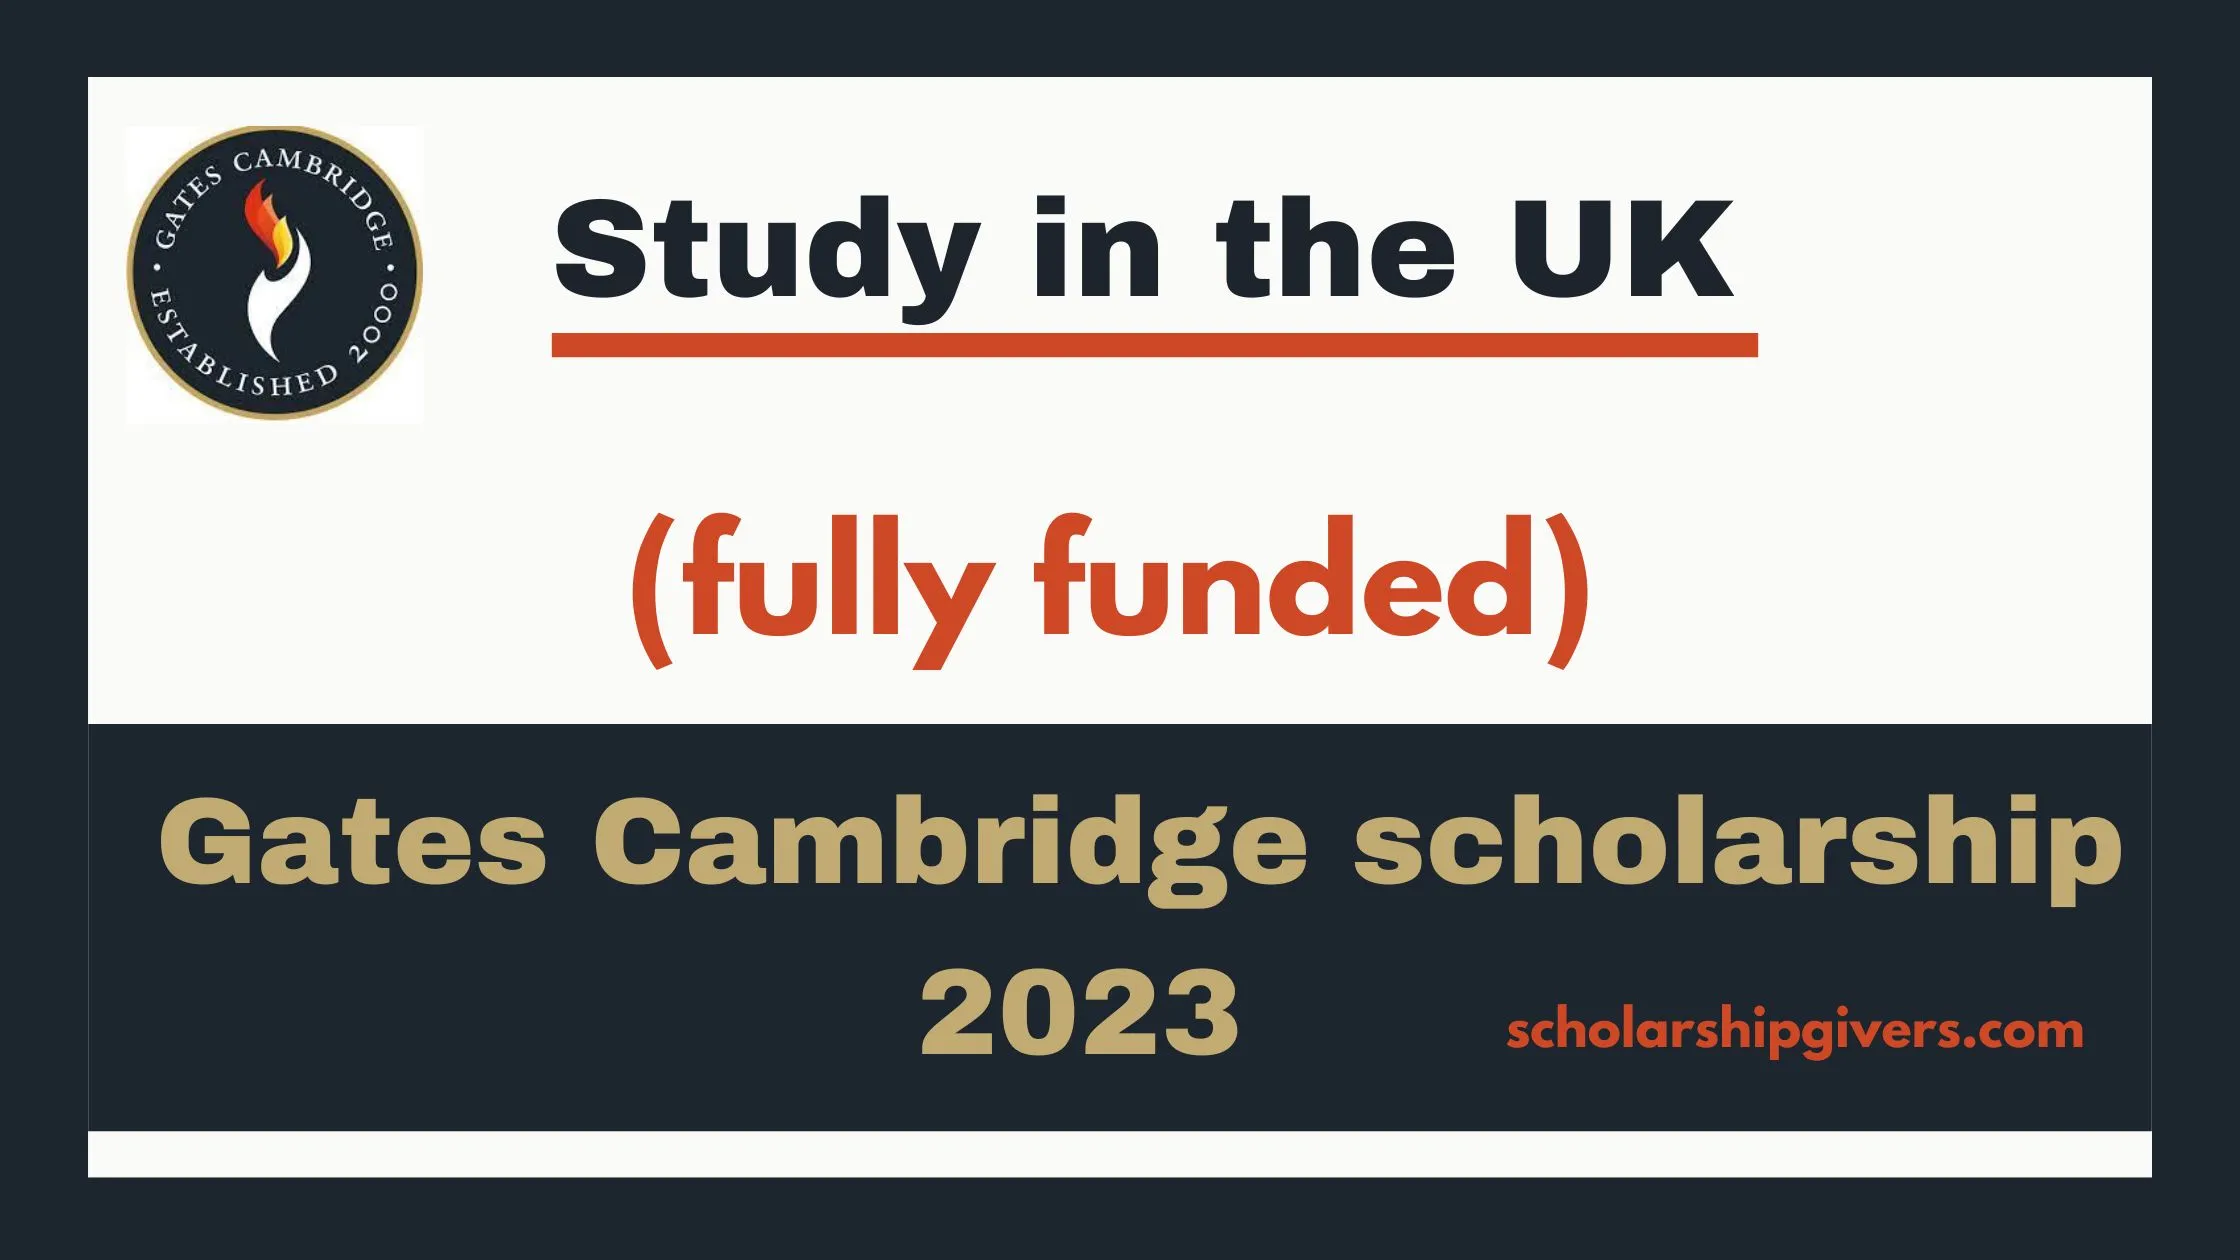 It would be most beneficial if you pursued your studies in the UK. Congratulations! There is currently an opening for the Gates Cambridge Scholarship 2023.